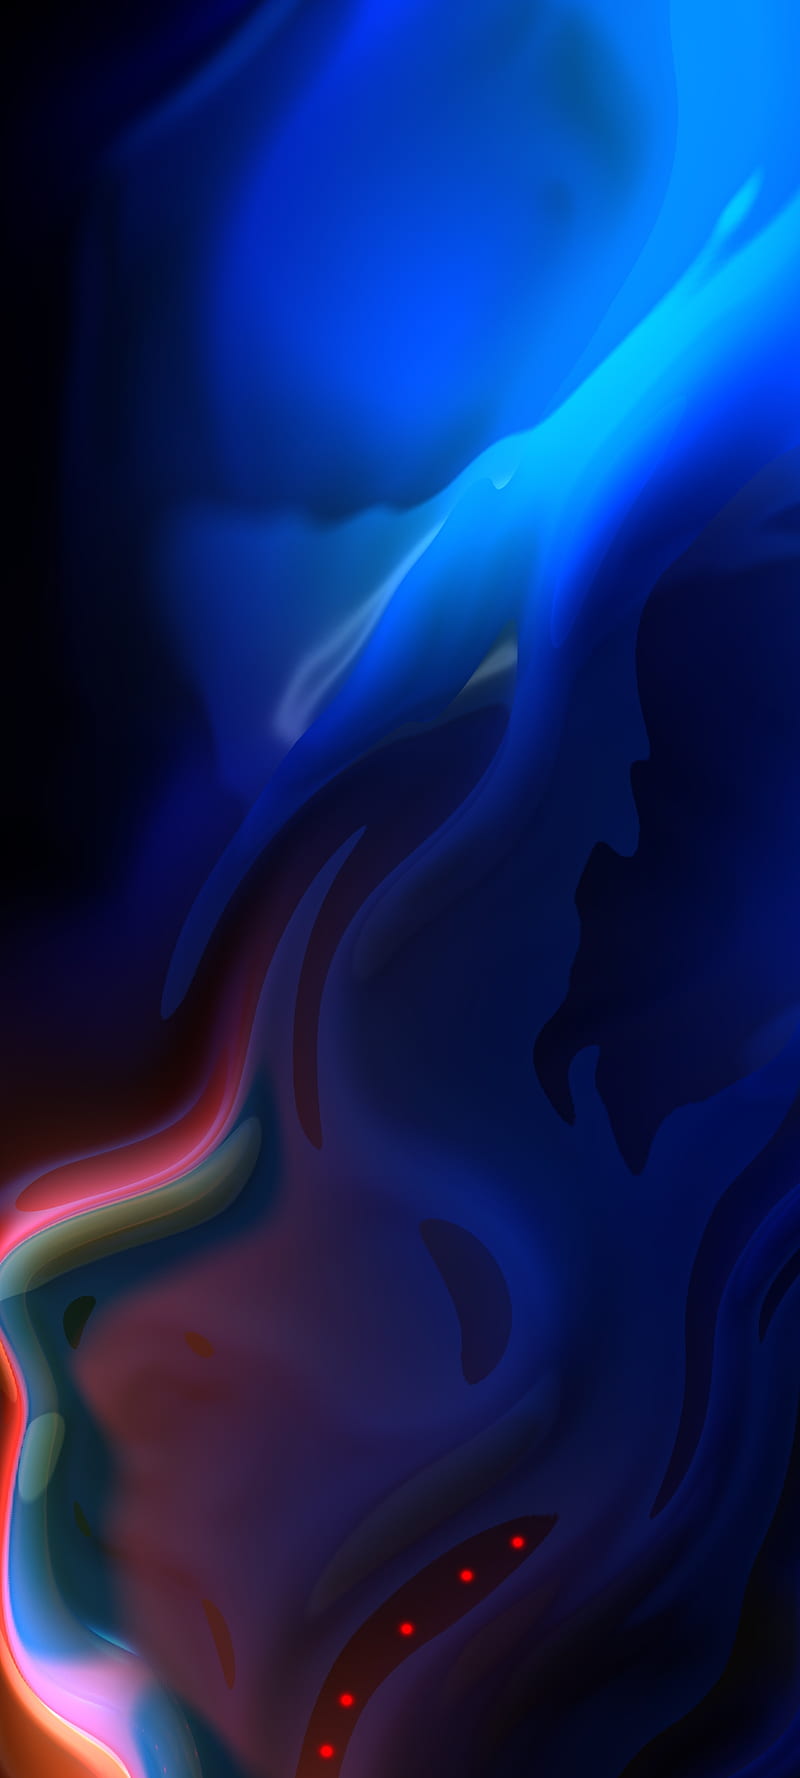 Fluid, abstract, amoled, blue, purple, red, HD phone wallpaper